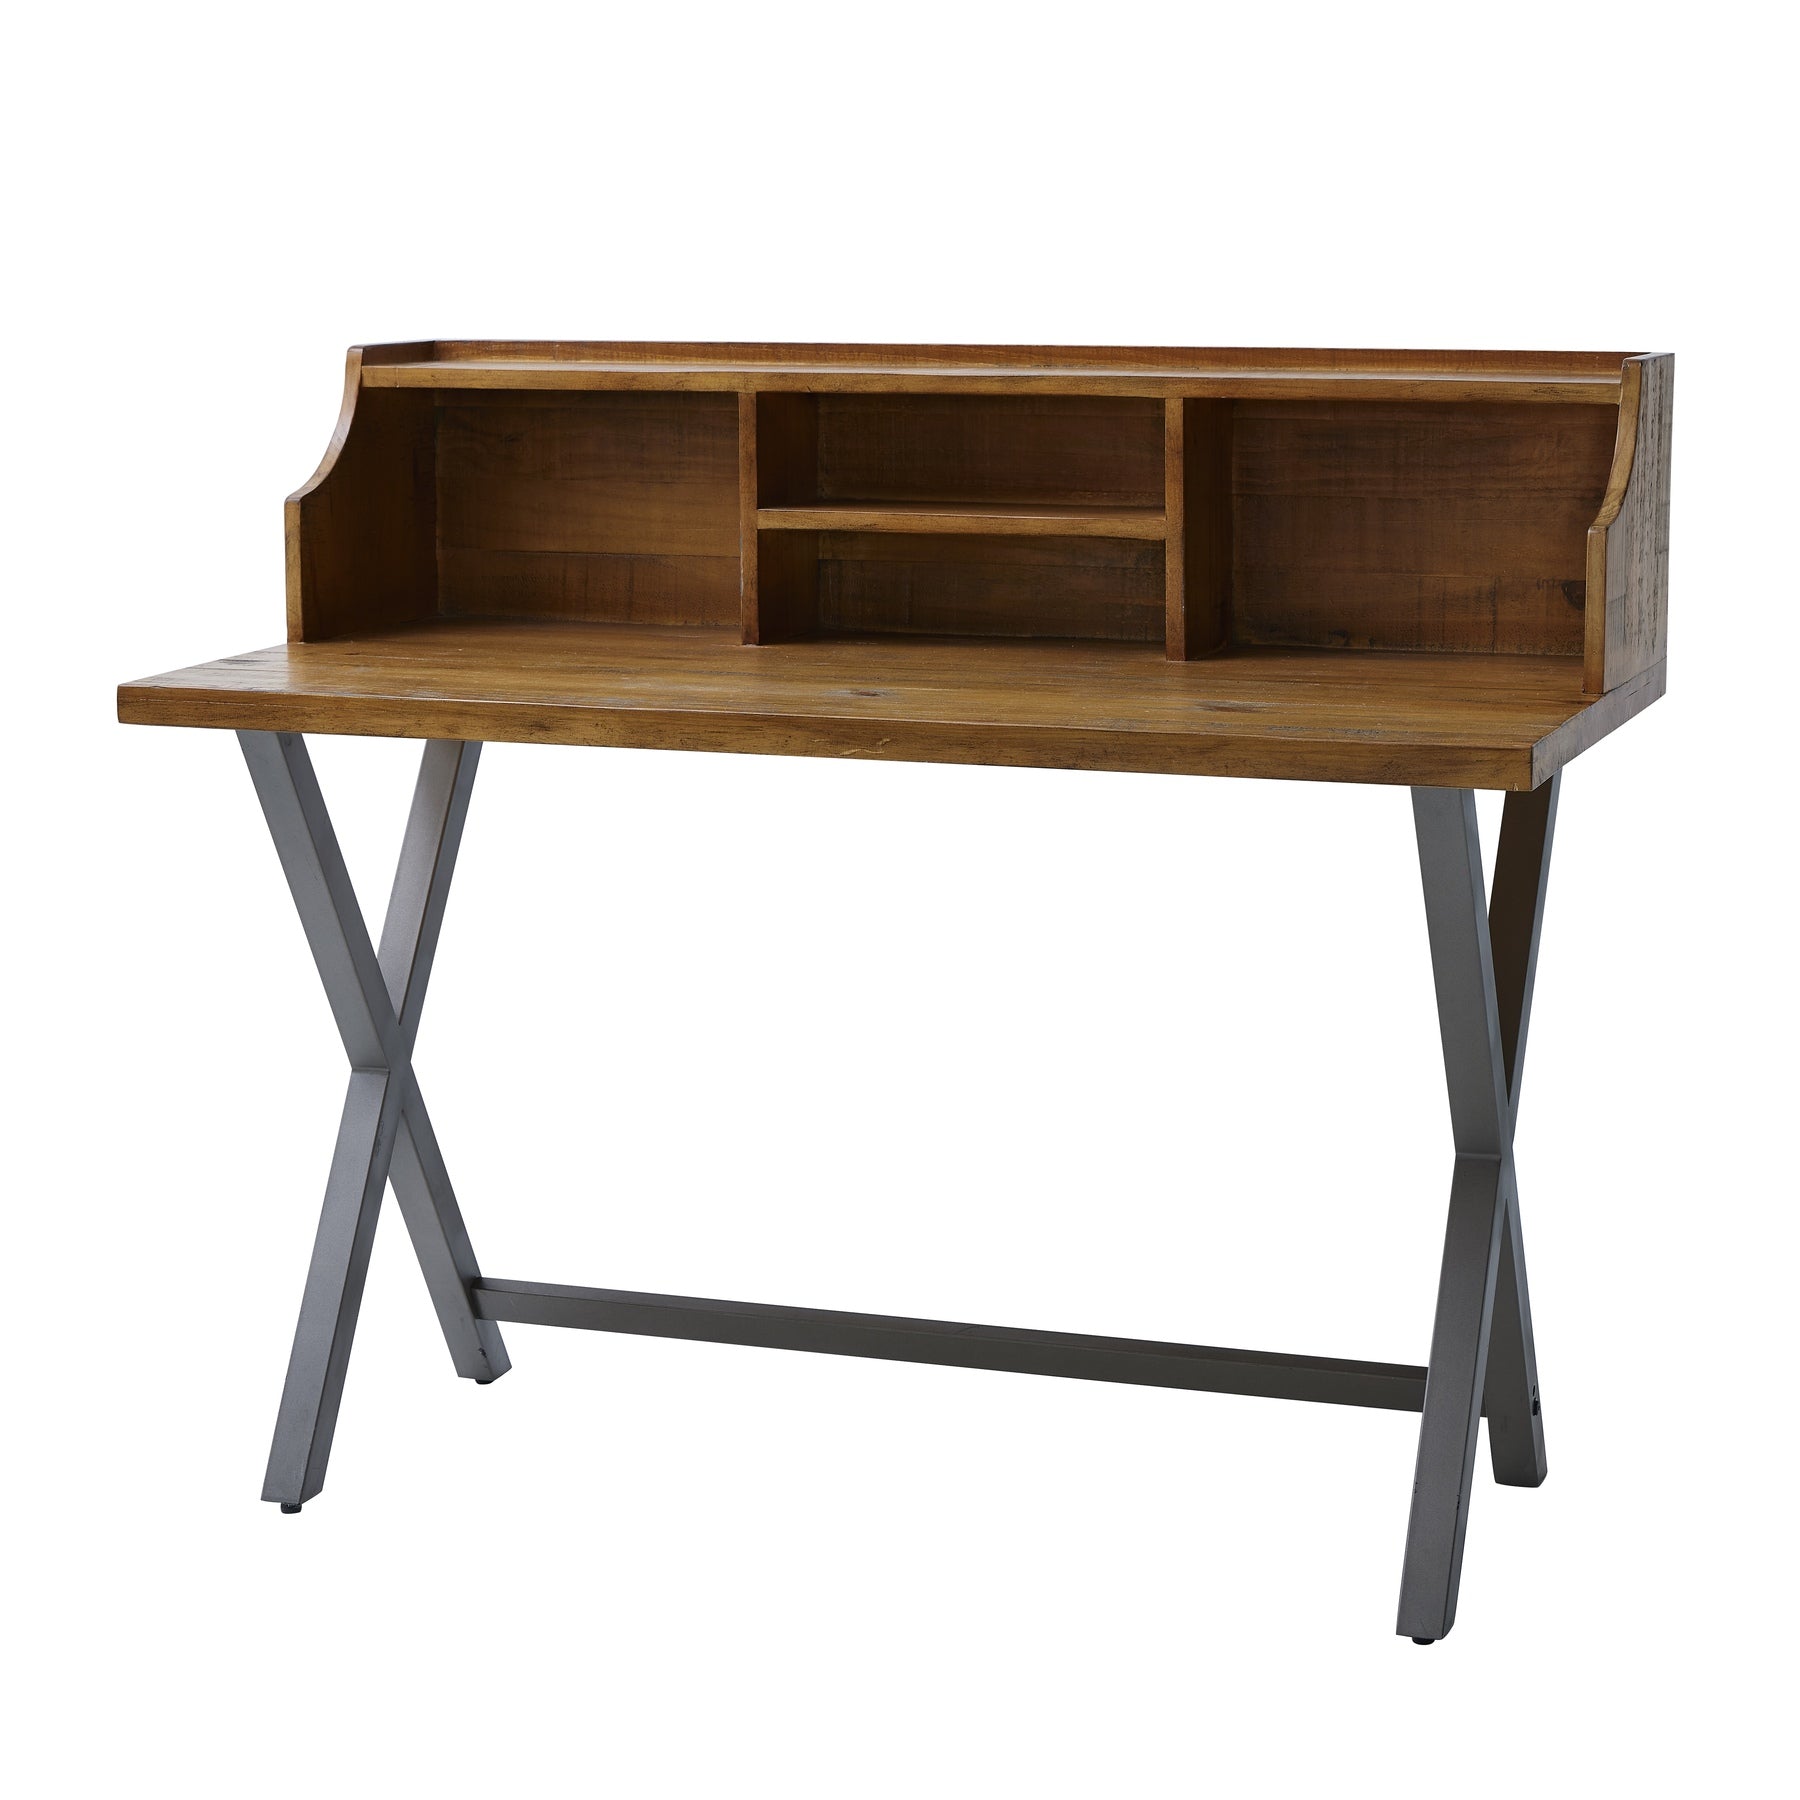 Wooden Hand Made Brown Desk For Hill Interiors - HIL-21550